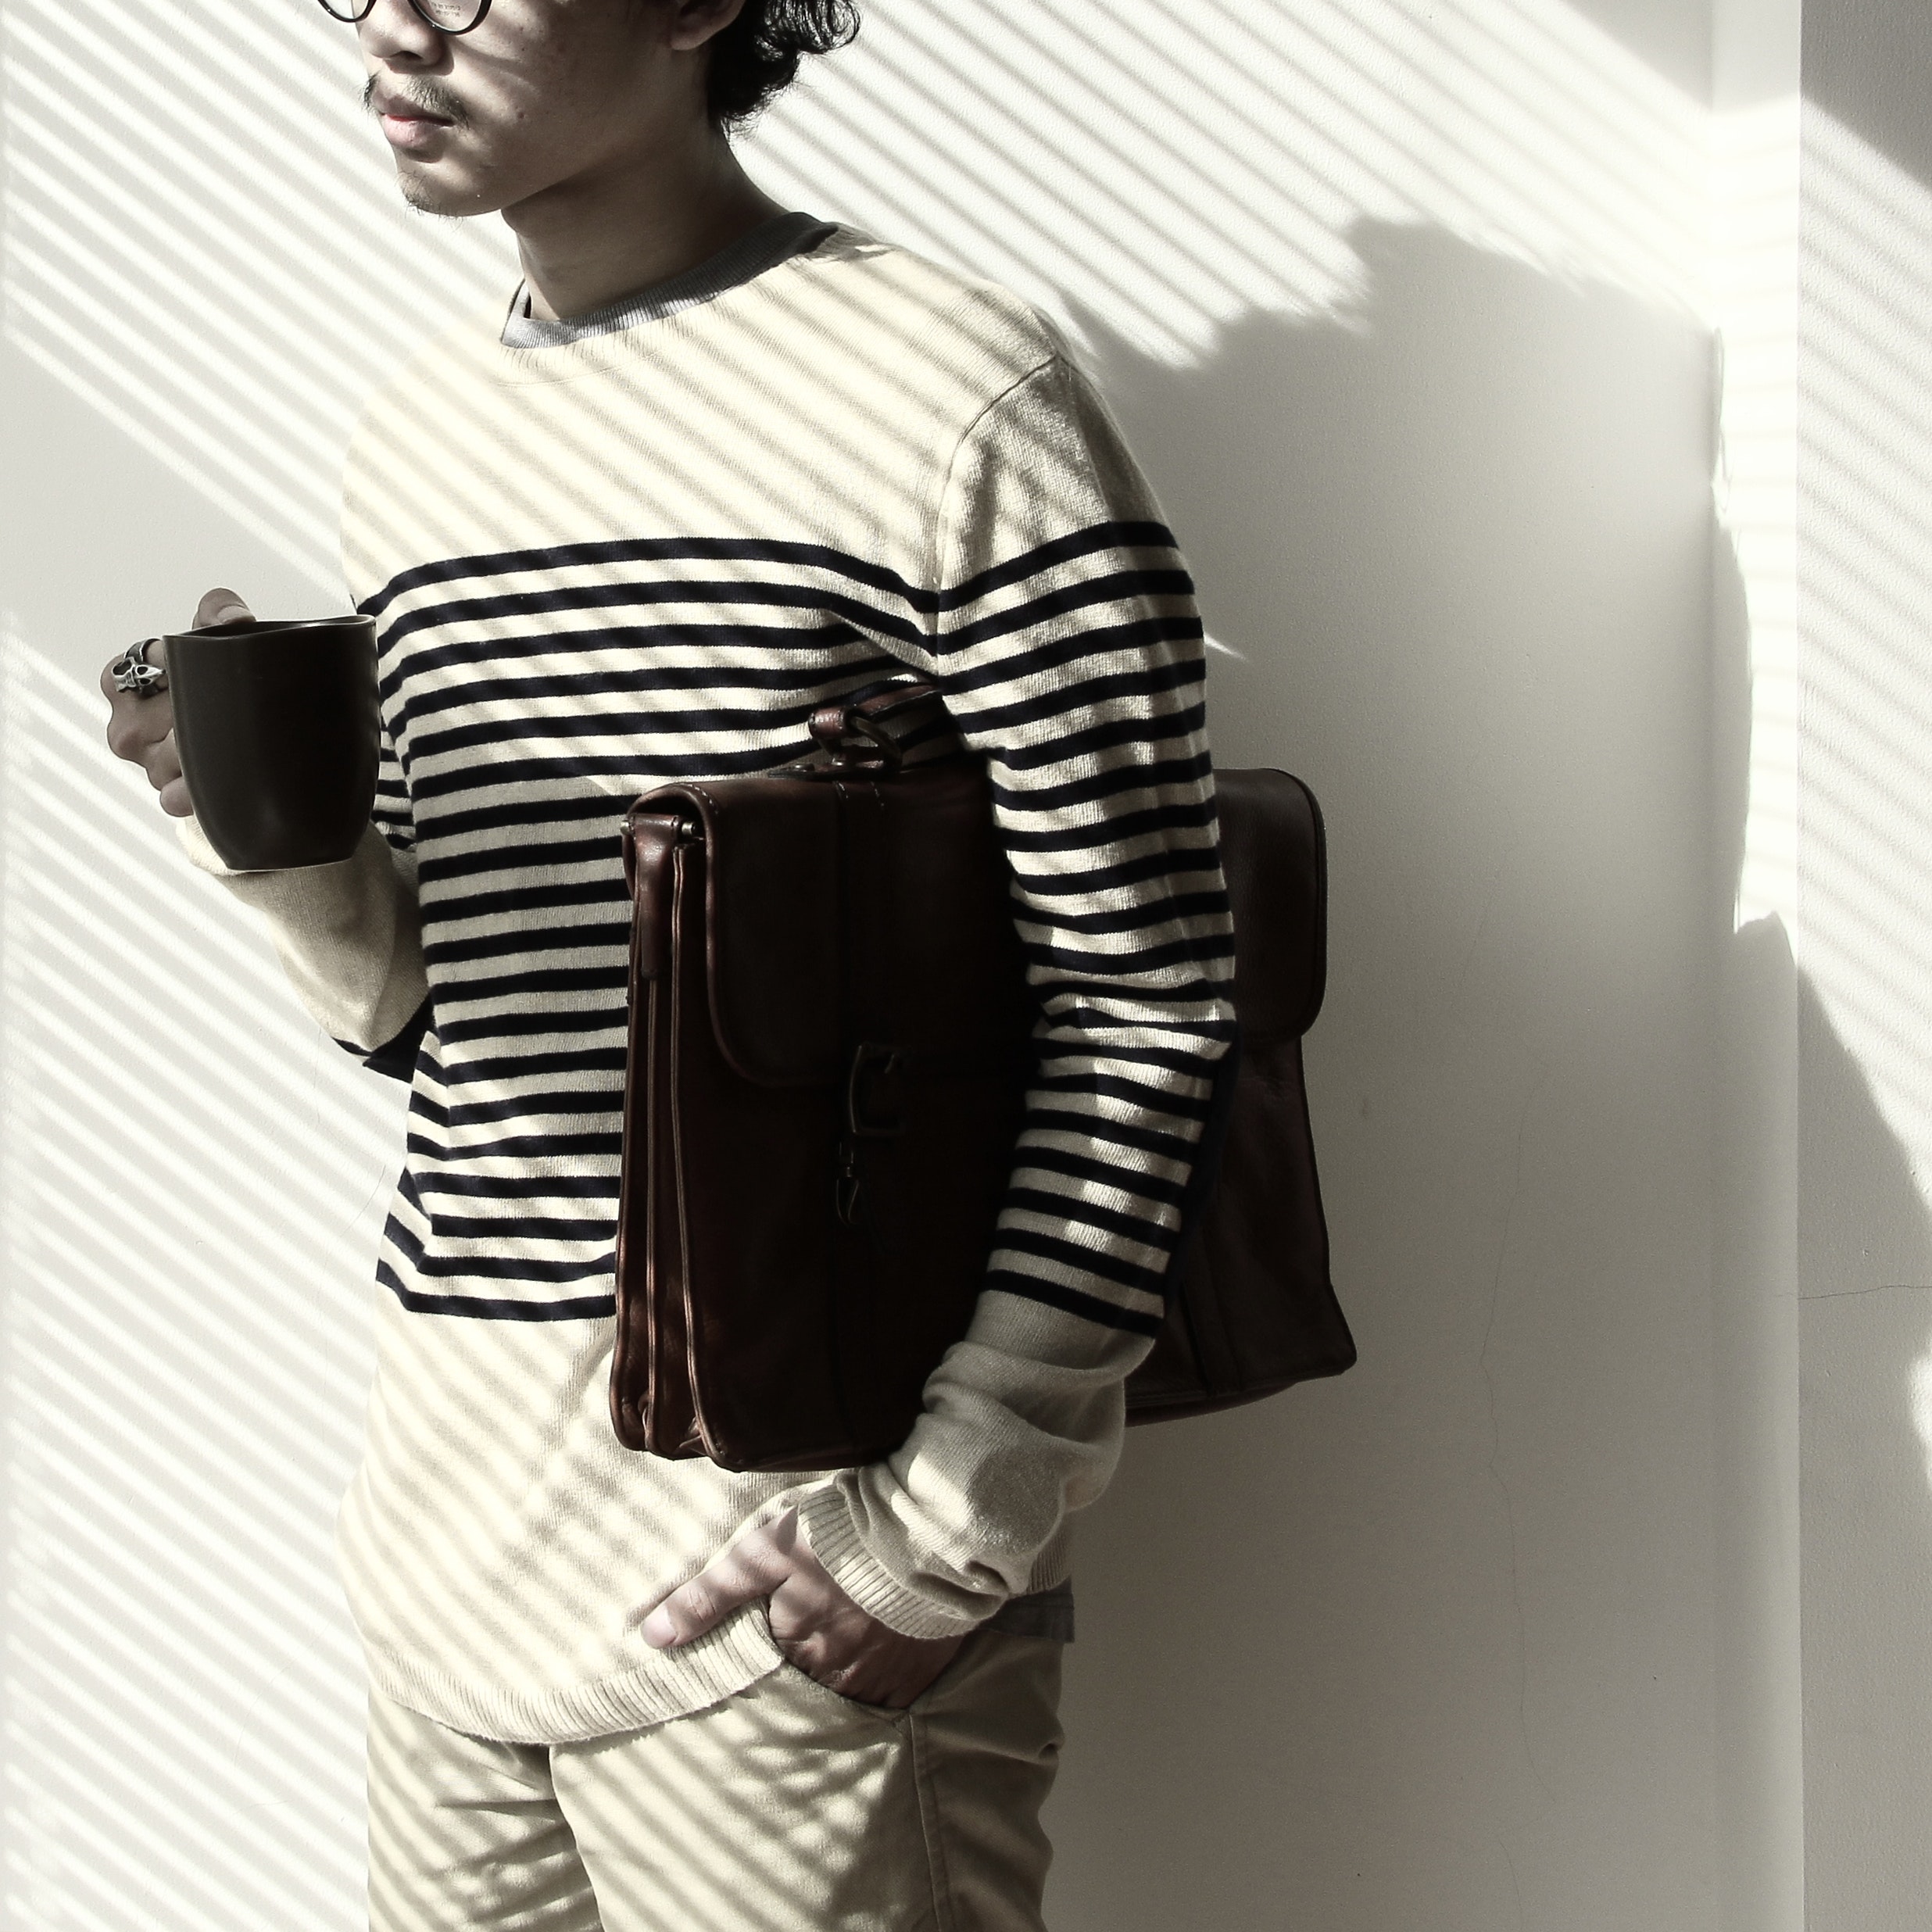 Standing Brunet Person Waring Eyeglasses and White Black Stripe Sweater Holding Mug and Briefcase, Business, Businessman, Coffee, Fashion, HQ Photo